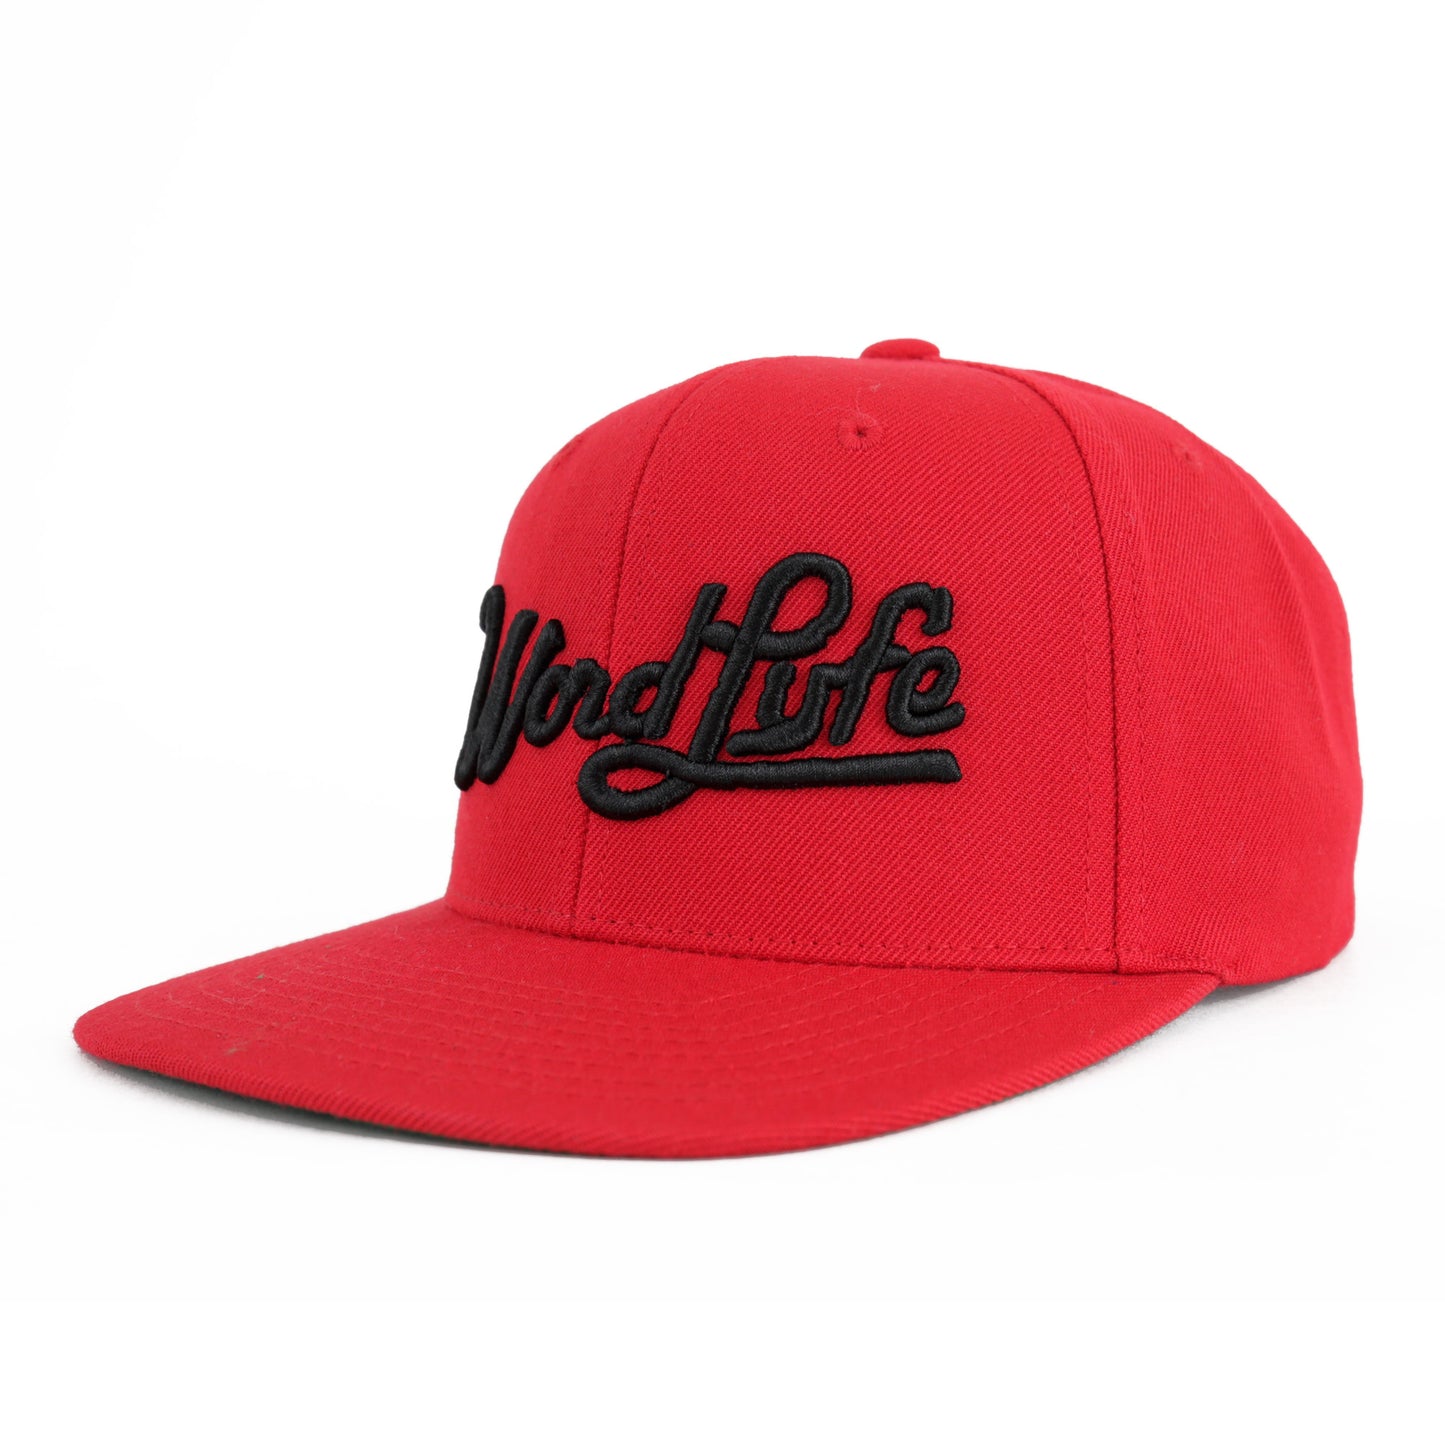 WORDLYFE SNAPBACK LIMITED EDITION "SELECTA" (RED/BLACK)